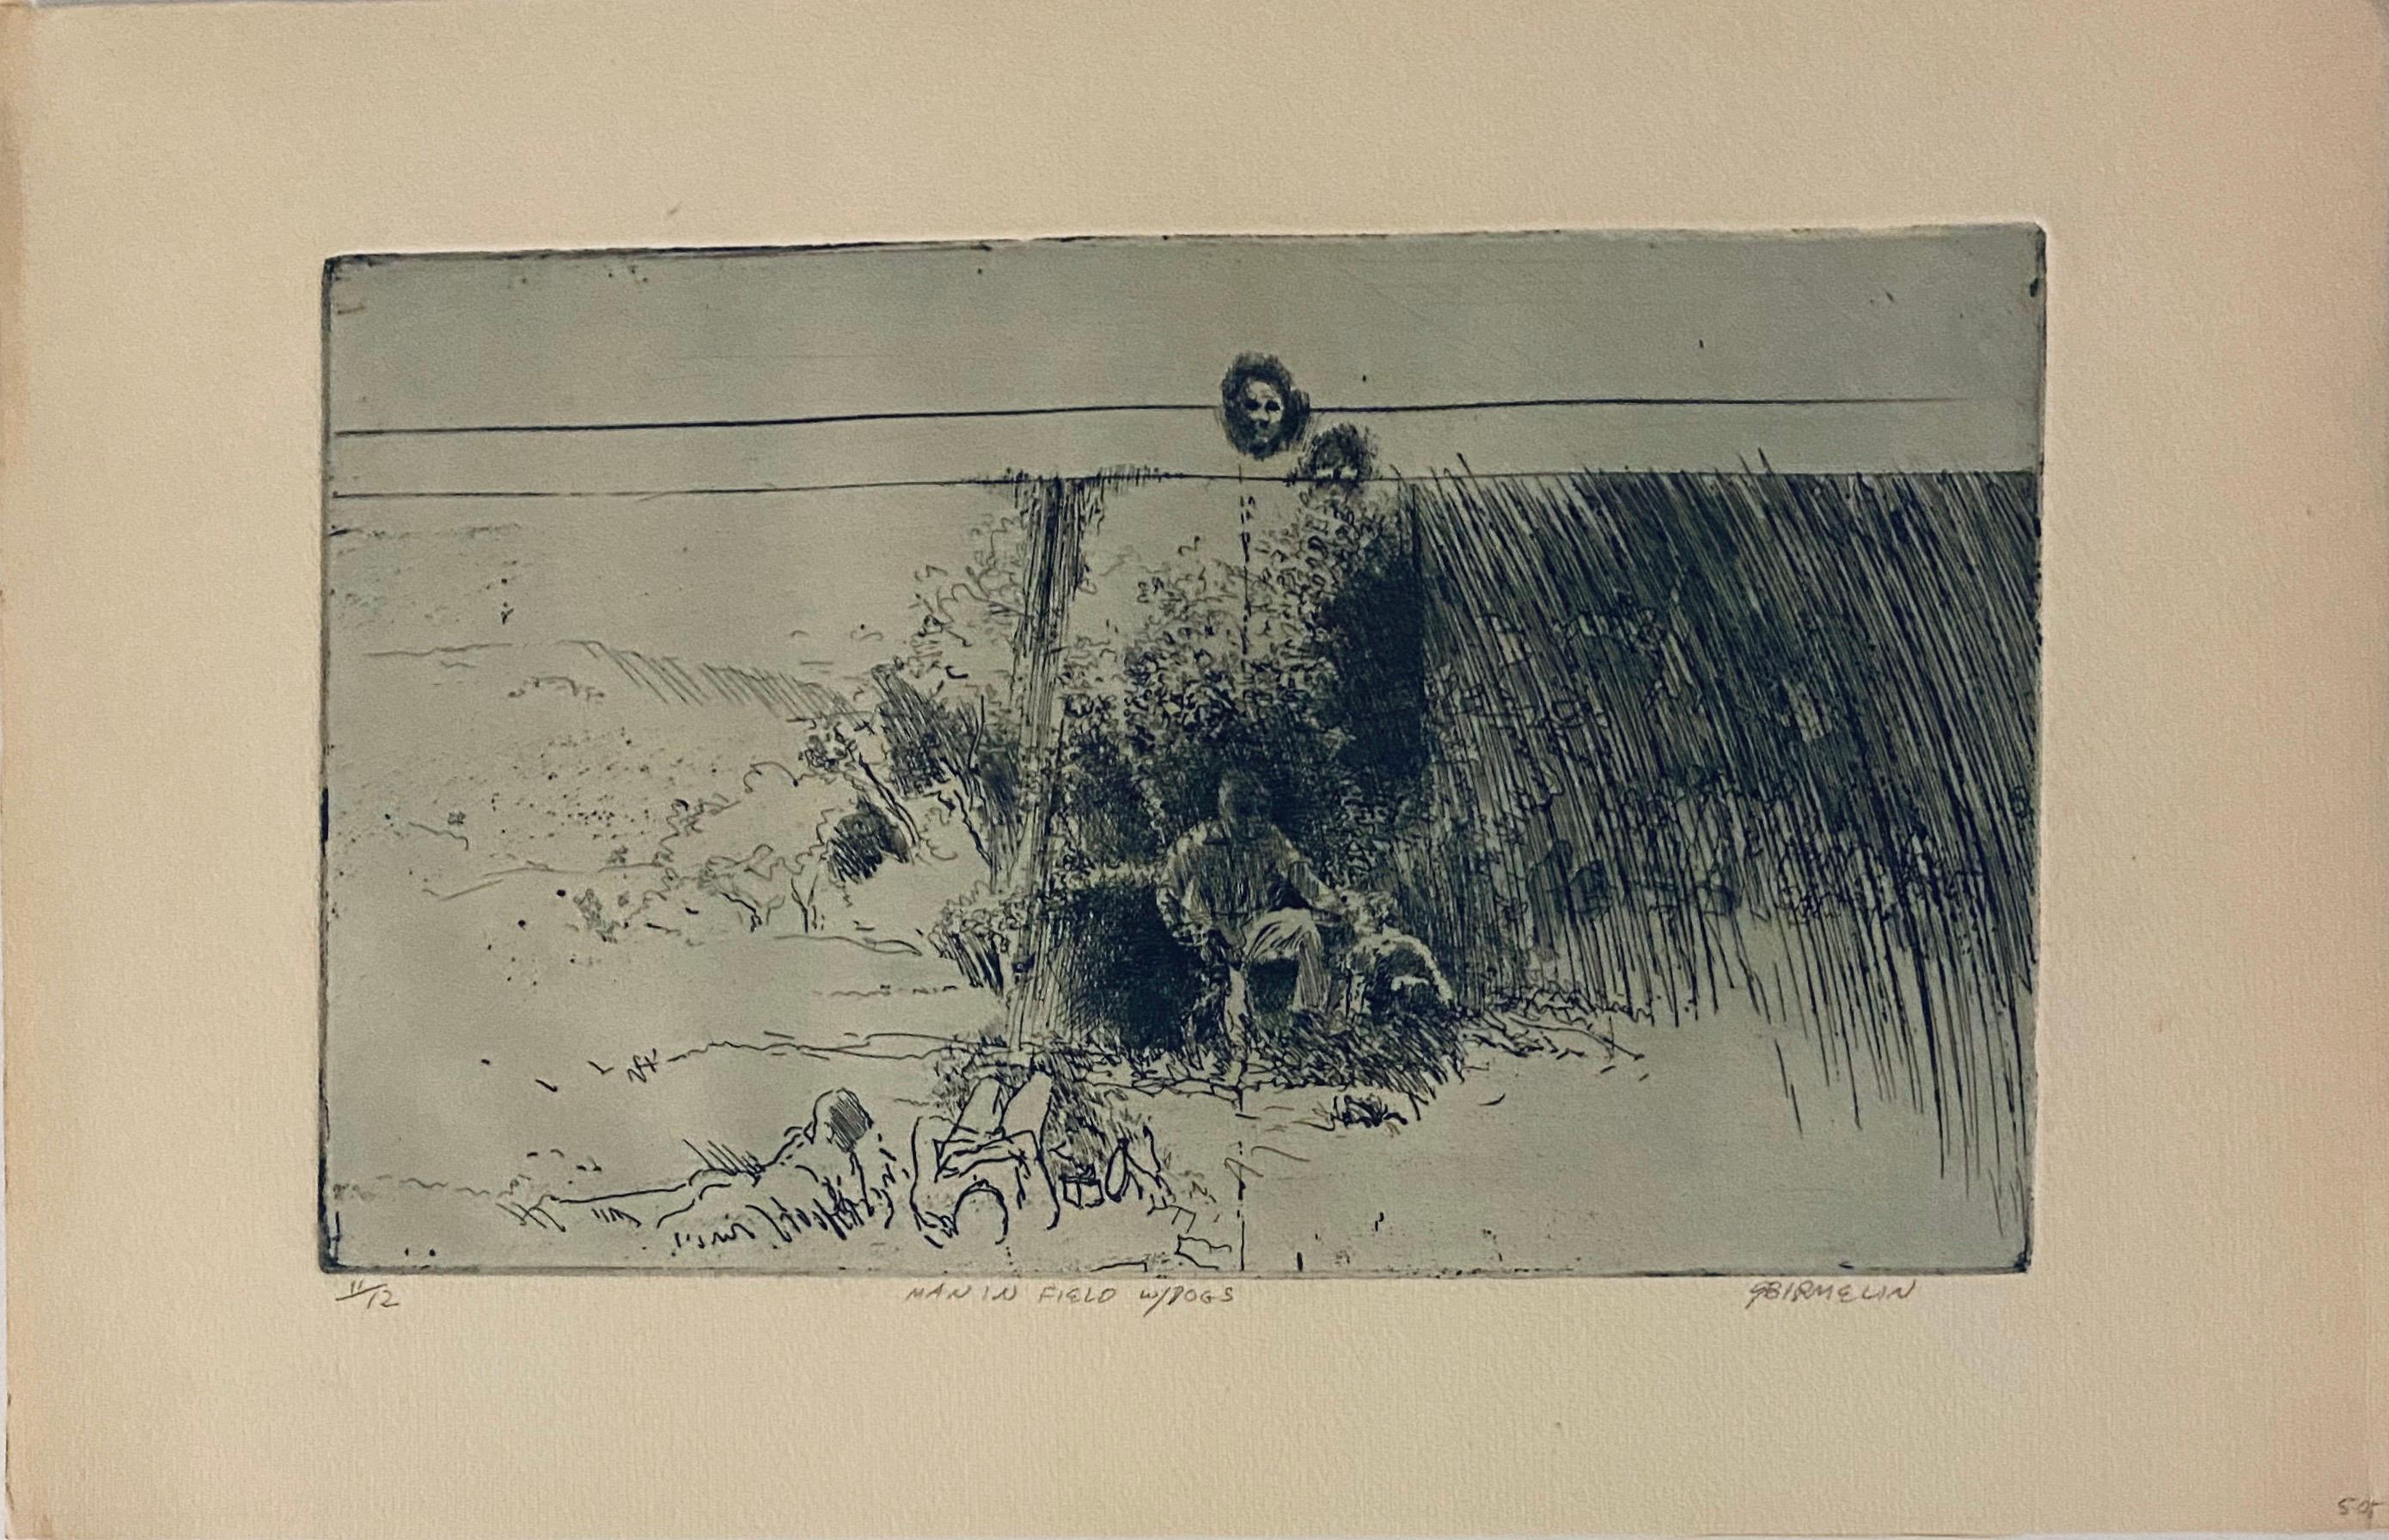 Man In Field With Dogs, American Modernist Abstract Etching - Print by Robert A. Birmelin